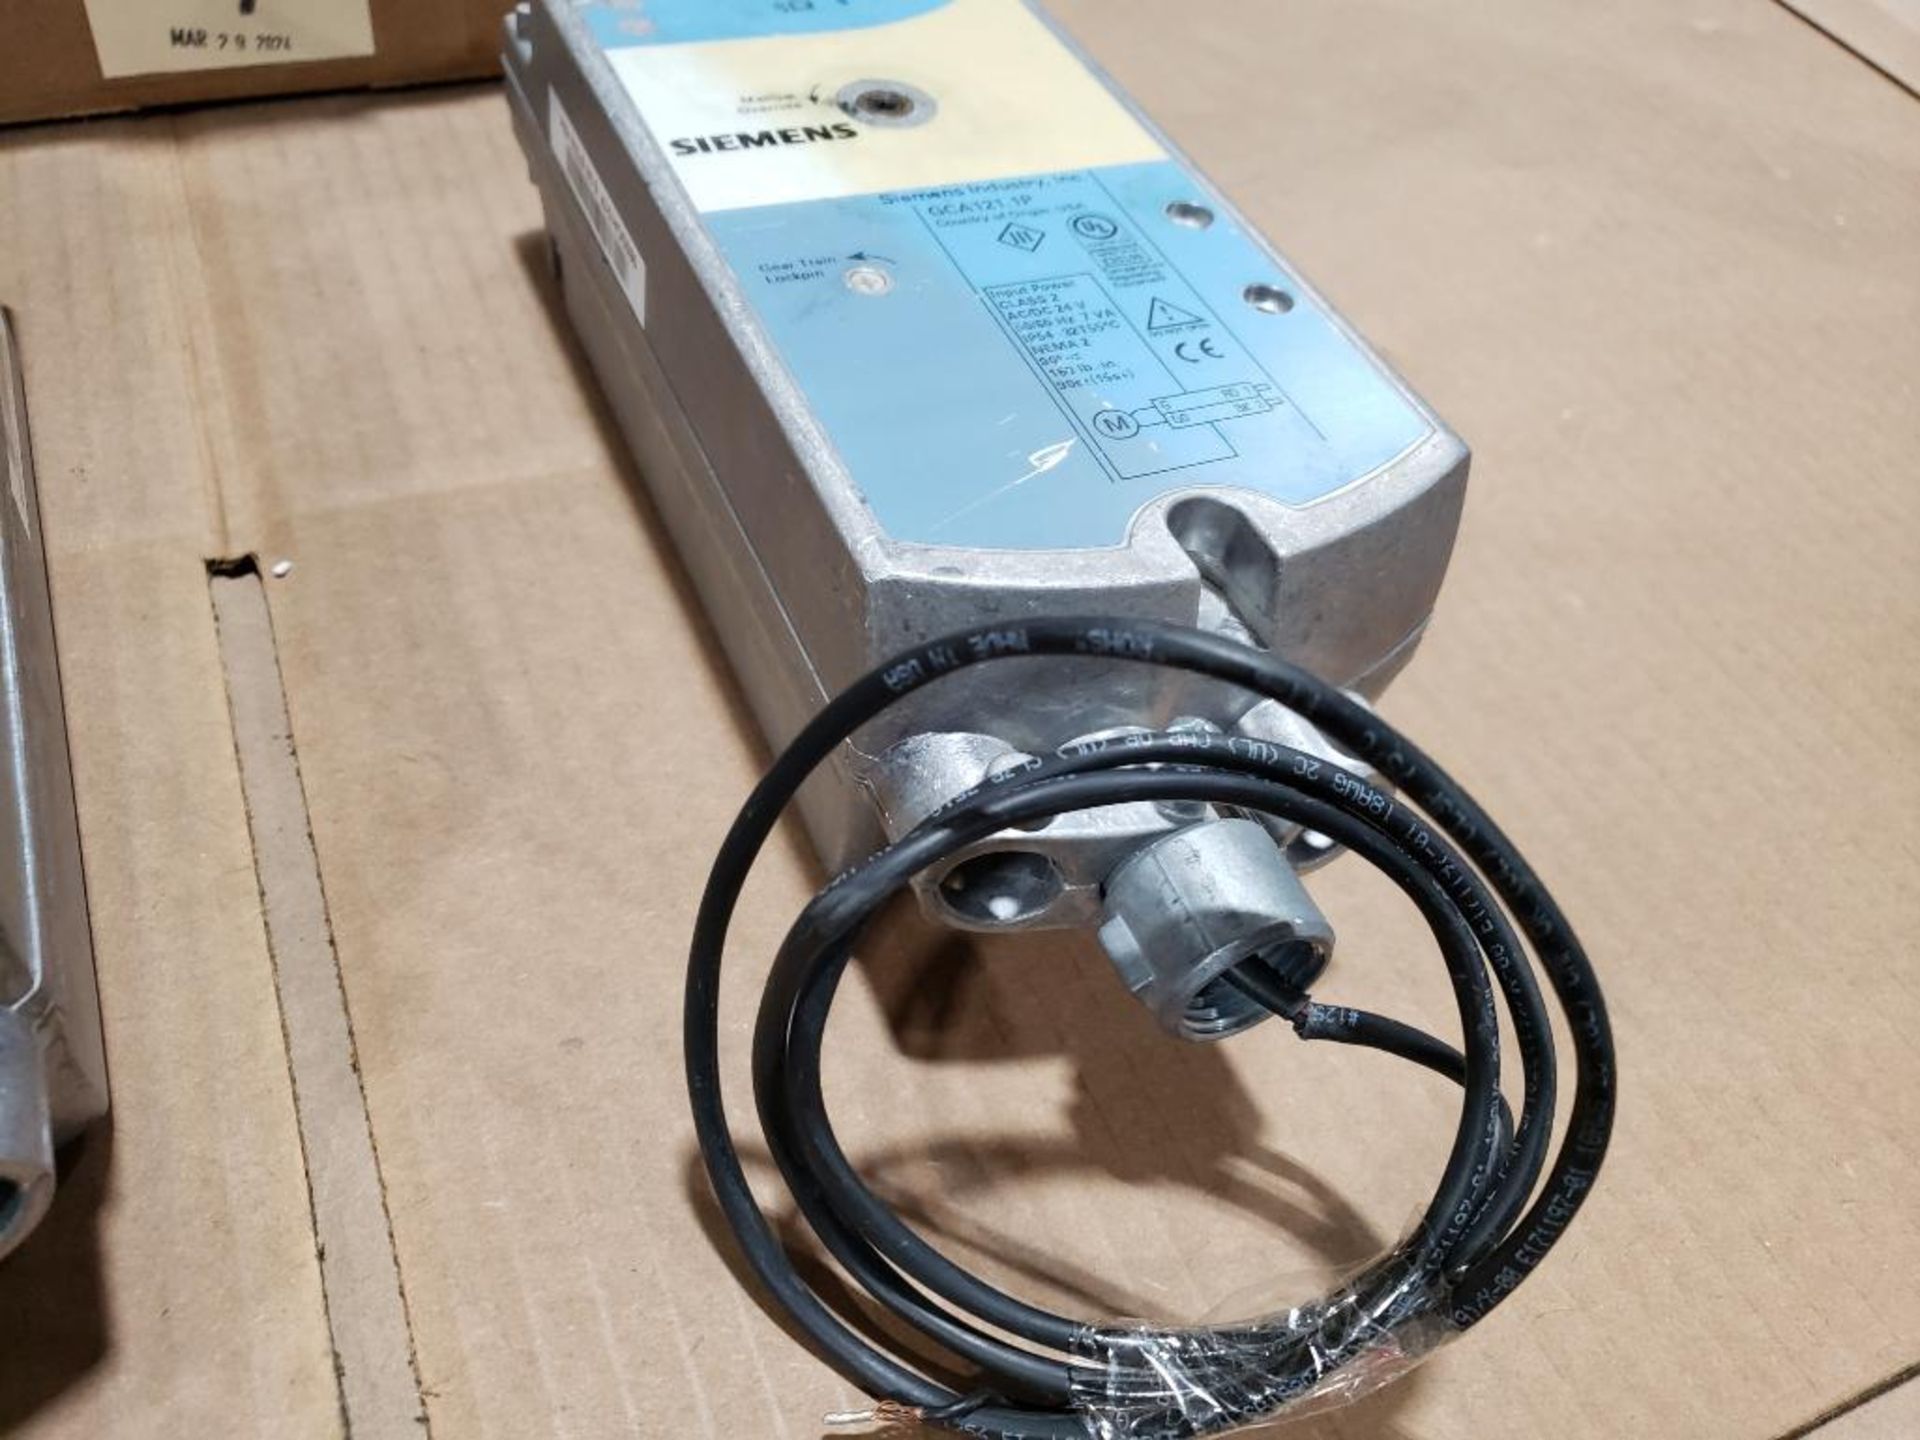 Qty 2 - Siemens actuator. Part number GCA121-1P. - Image 4 of 5